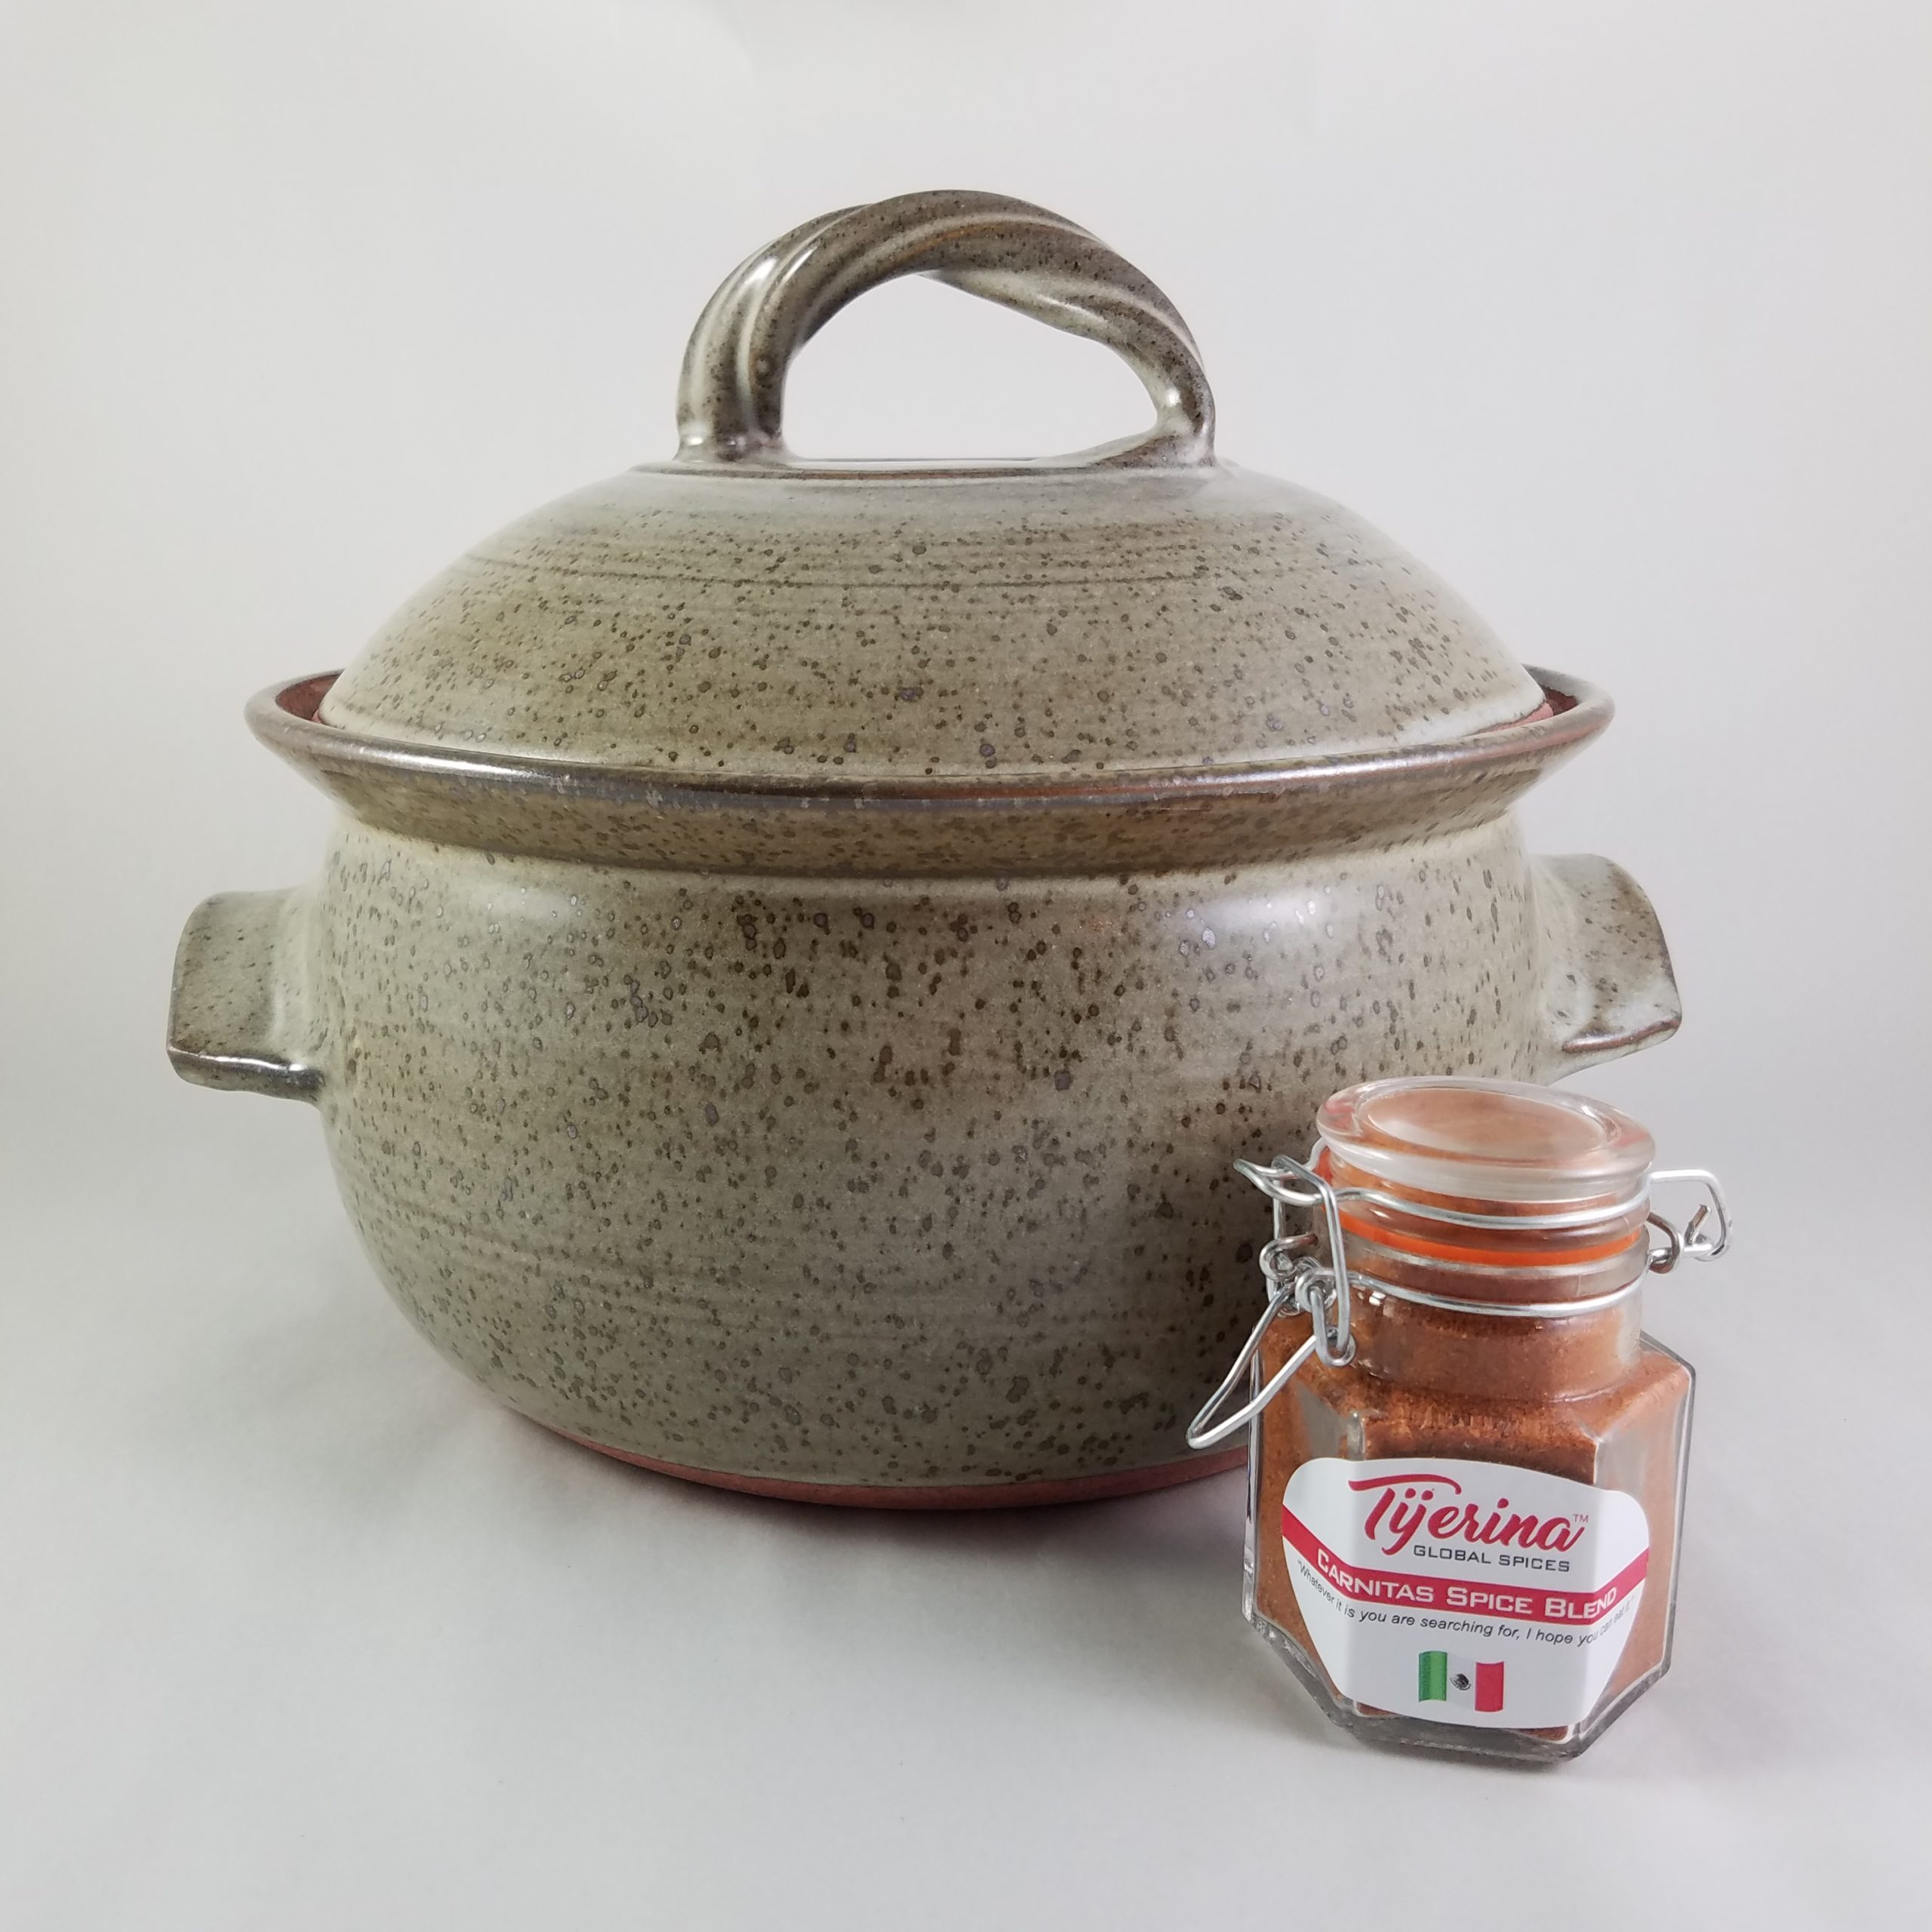 {Limited Edition} Clay Coyote Dutch Oven with Tijerina Carnitas Spice Blend